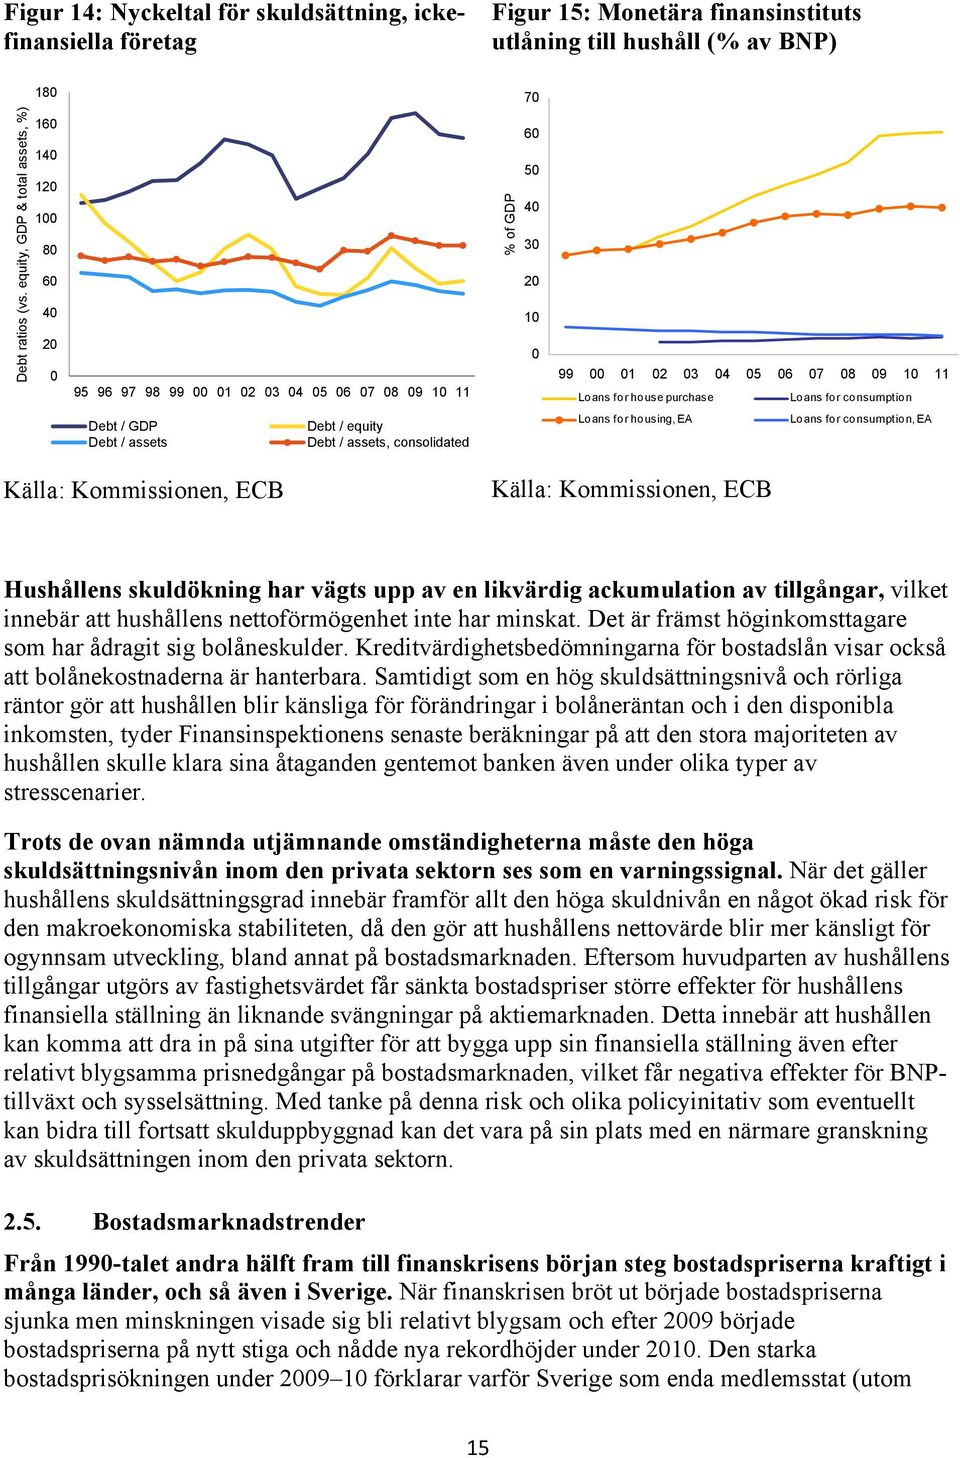 purchase Loans for consumption Debt / GDP Debt / equity Debt / assets Debt / assets, consolidated Loans for housing, EA Loans for consumption, EA Källa: Kommissionen, ECB Källa: Kommissionen, ECB